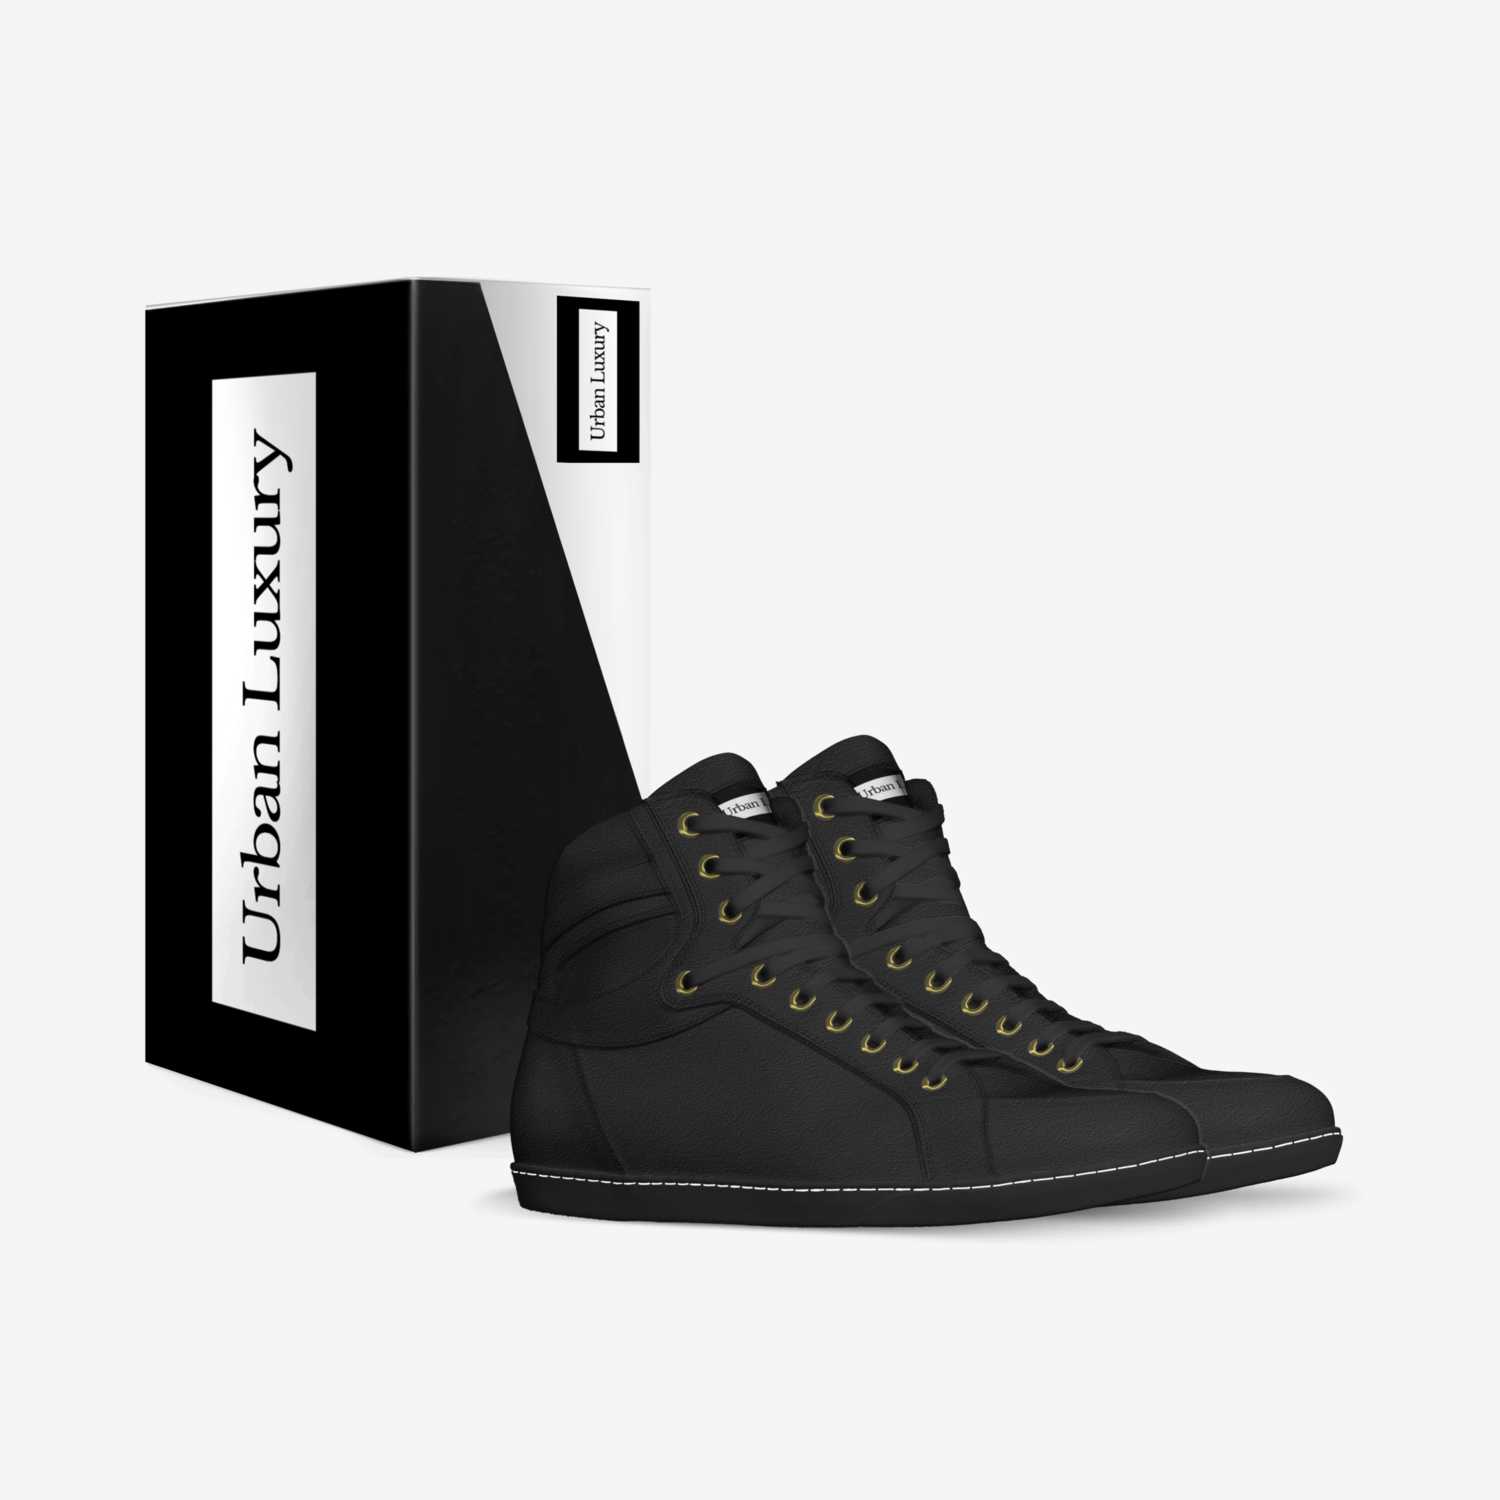 *Urban Luxury* custom made in Italy shoes by Christopher Turrentine | Box view